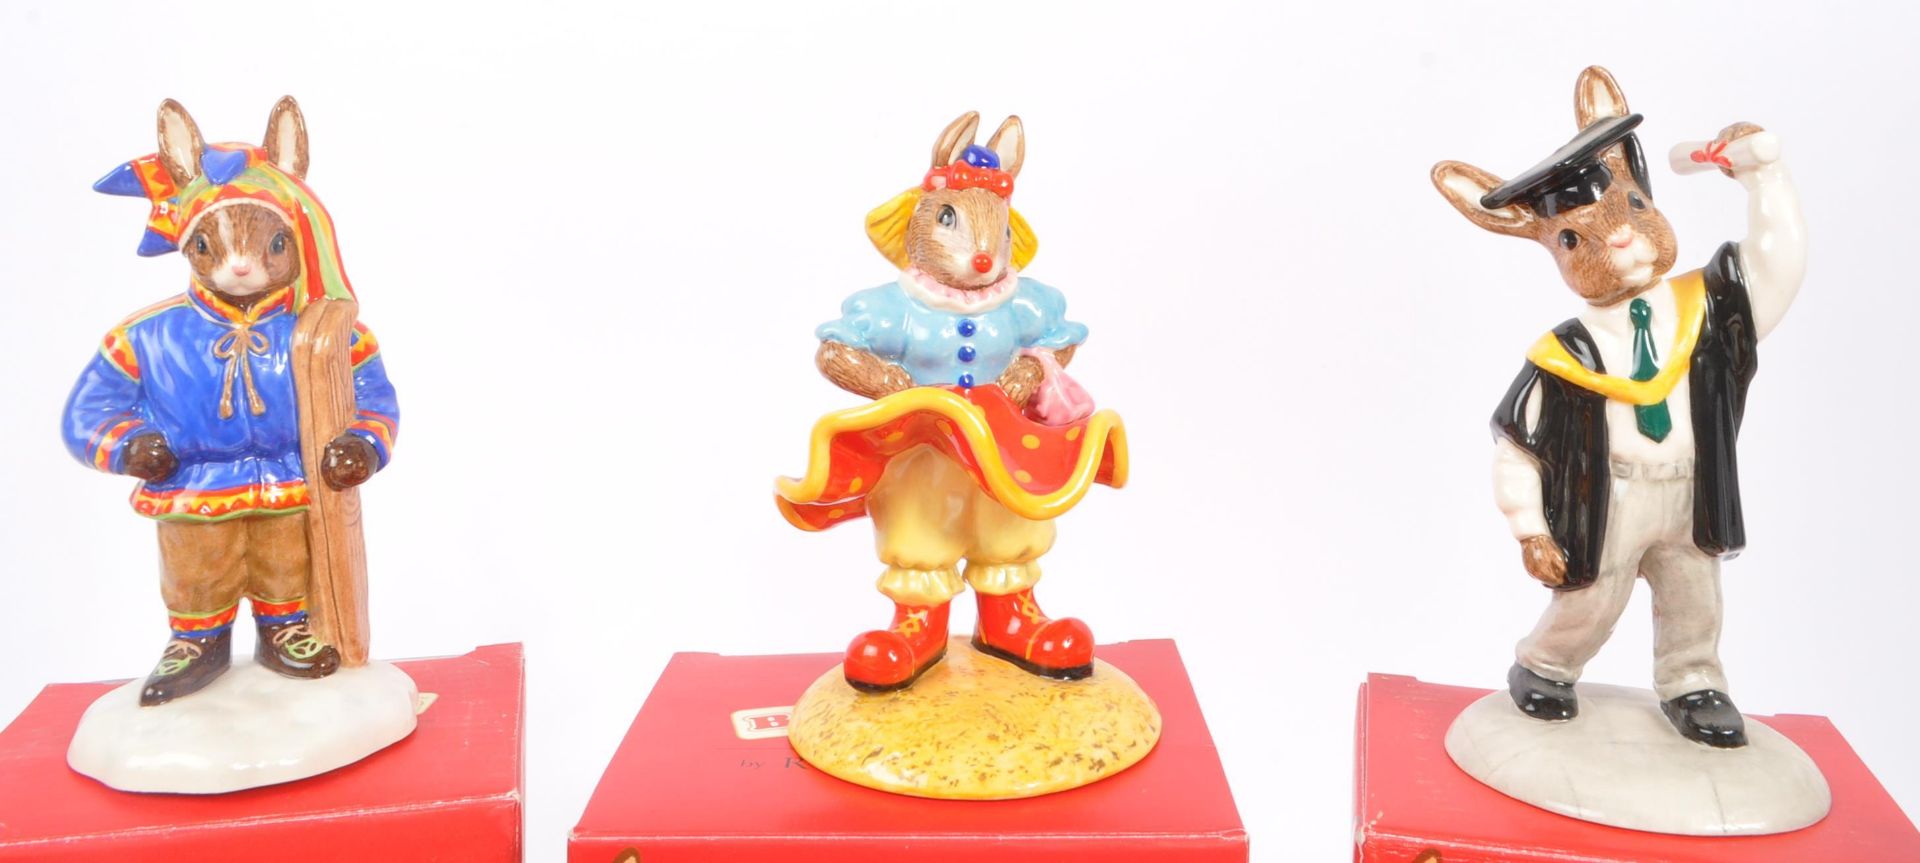 ROYAL DOULTON - BUNNYKINS - COLLECTION OF PORCELAIN FIGURES - Image 2 of 6